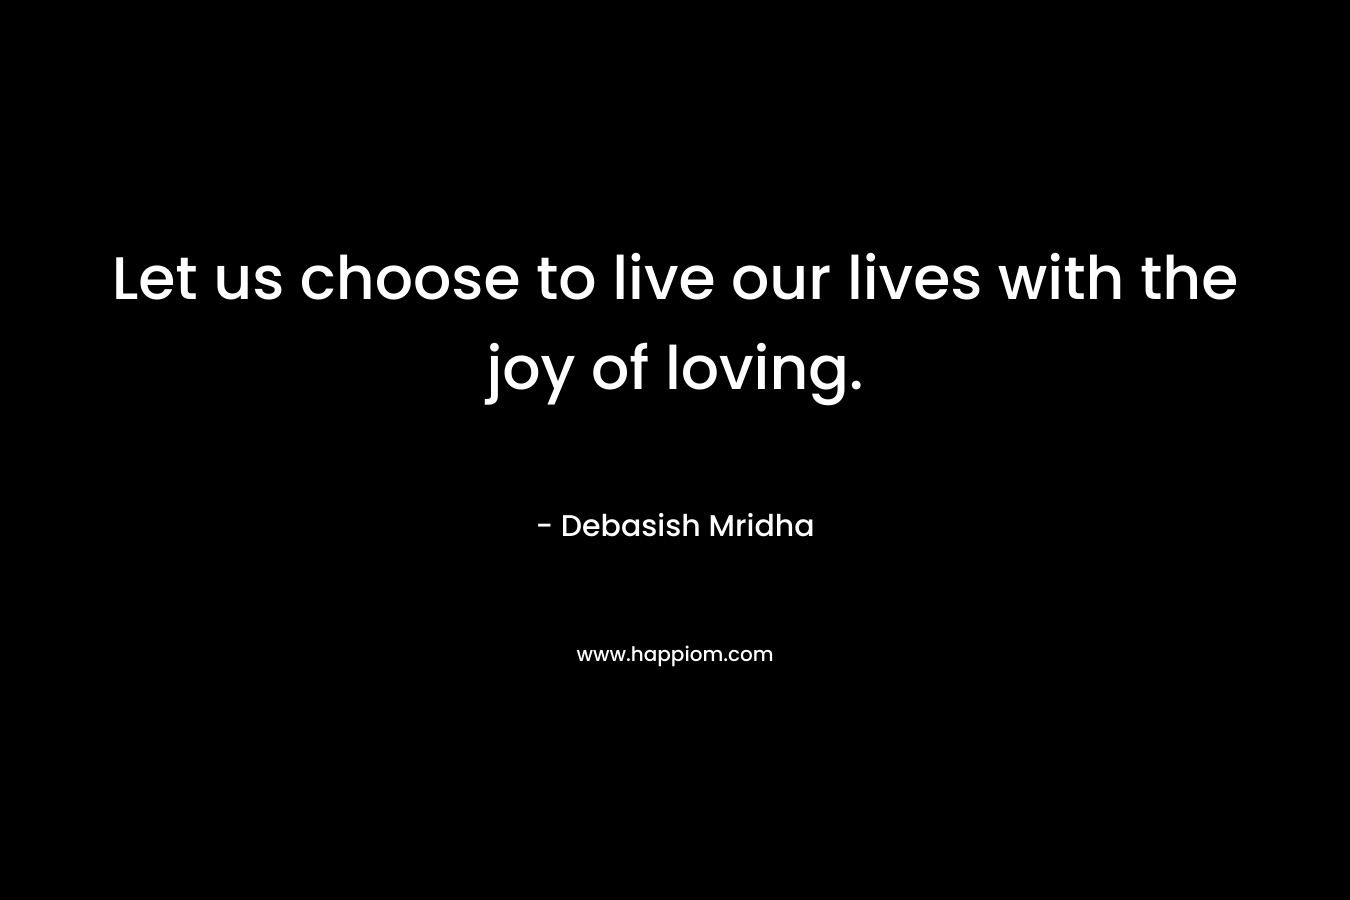 Let us choose to live our lives with the joy of loving.